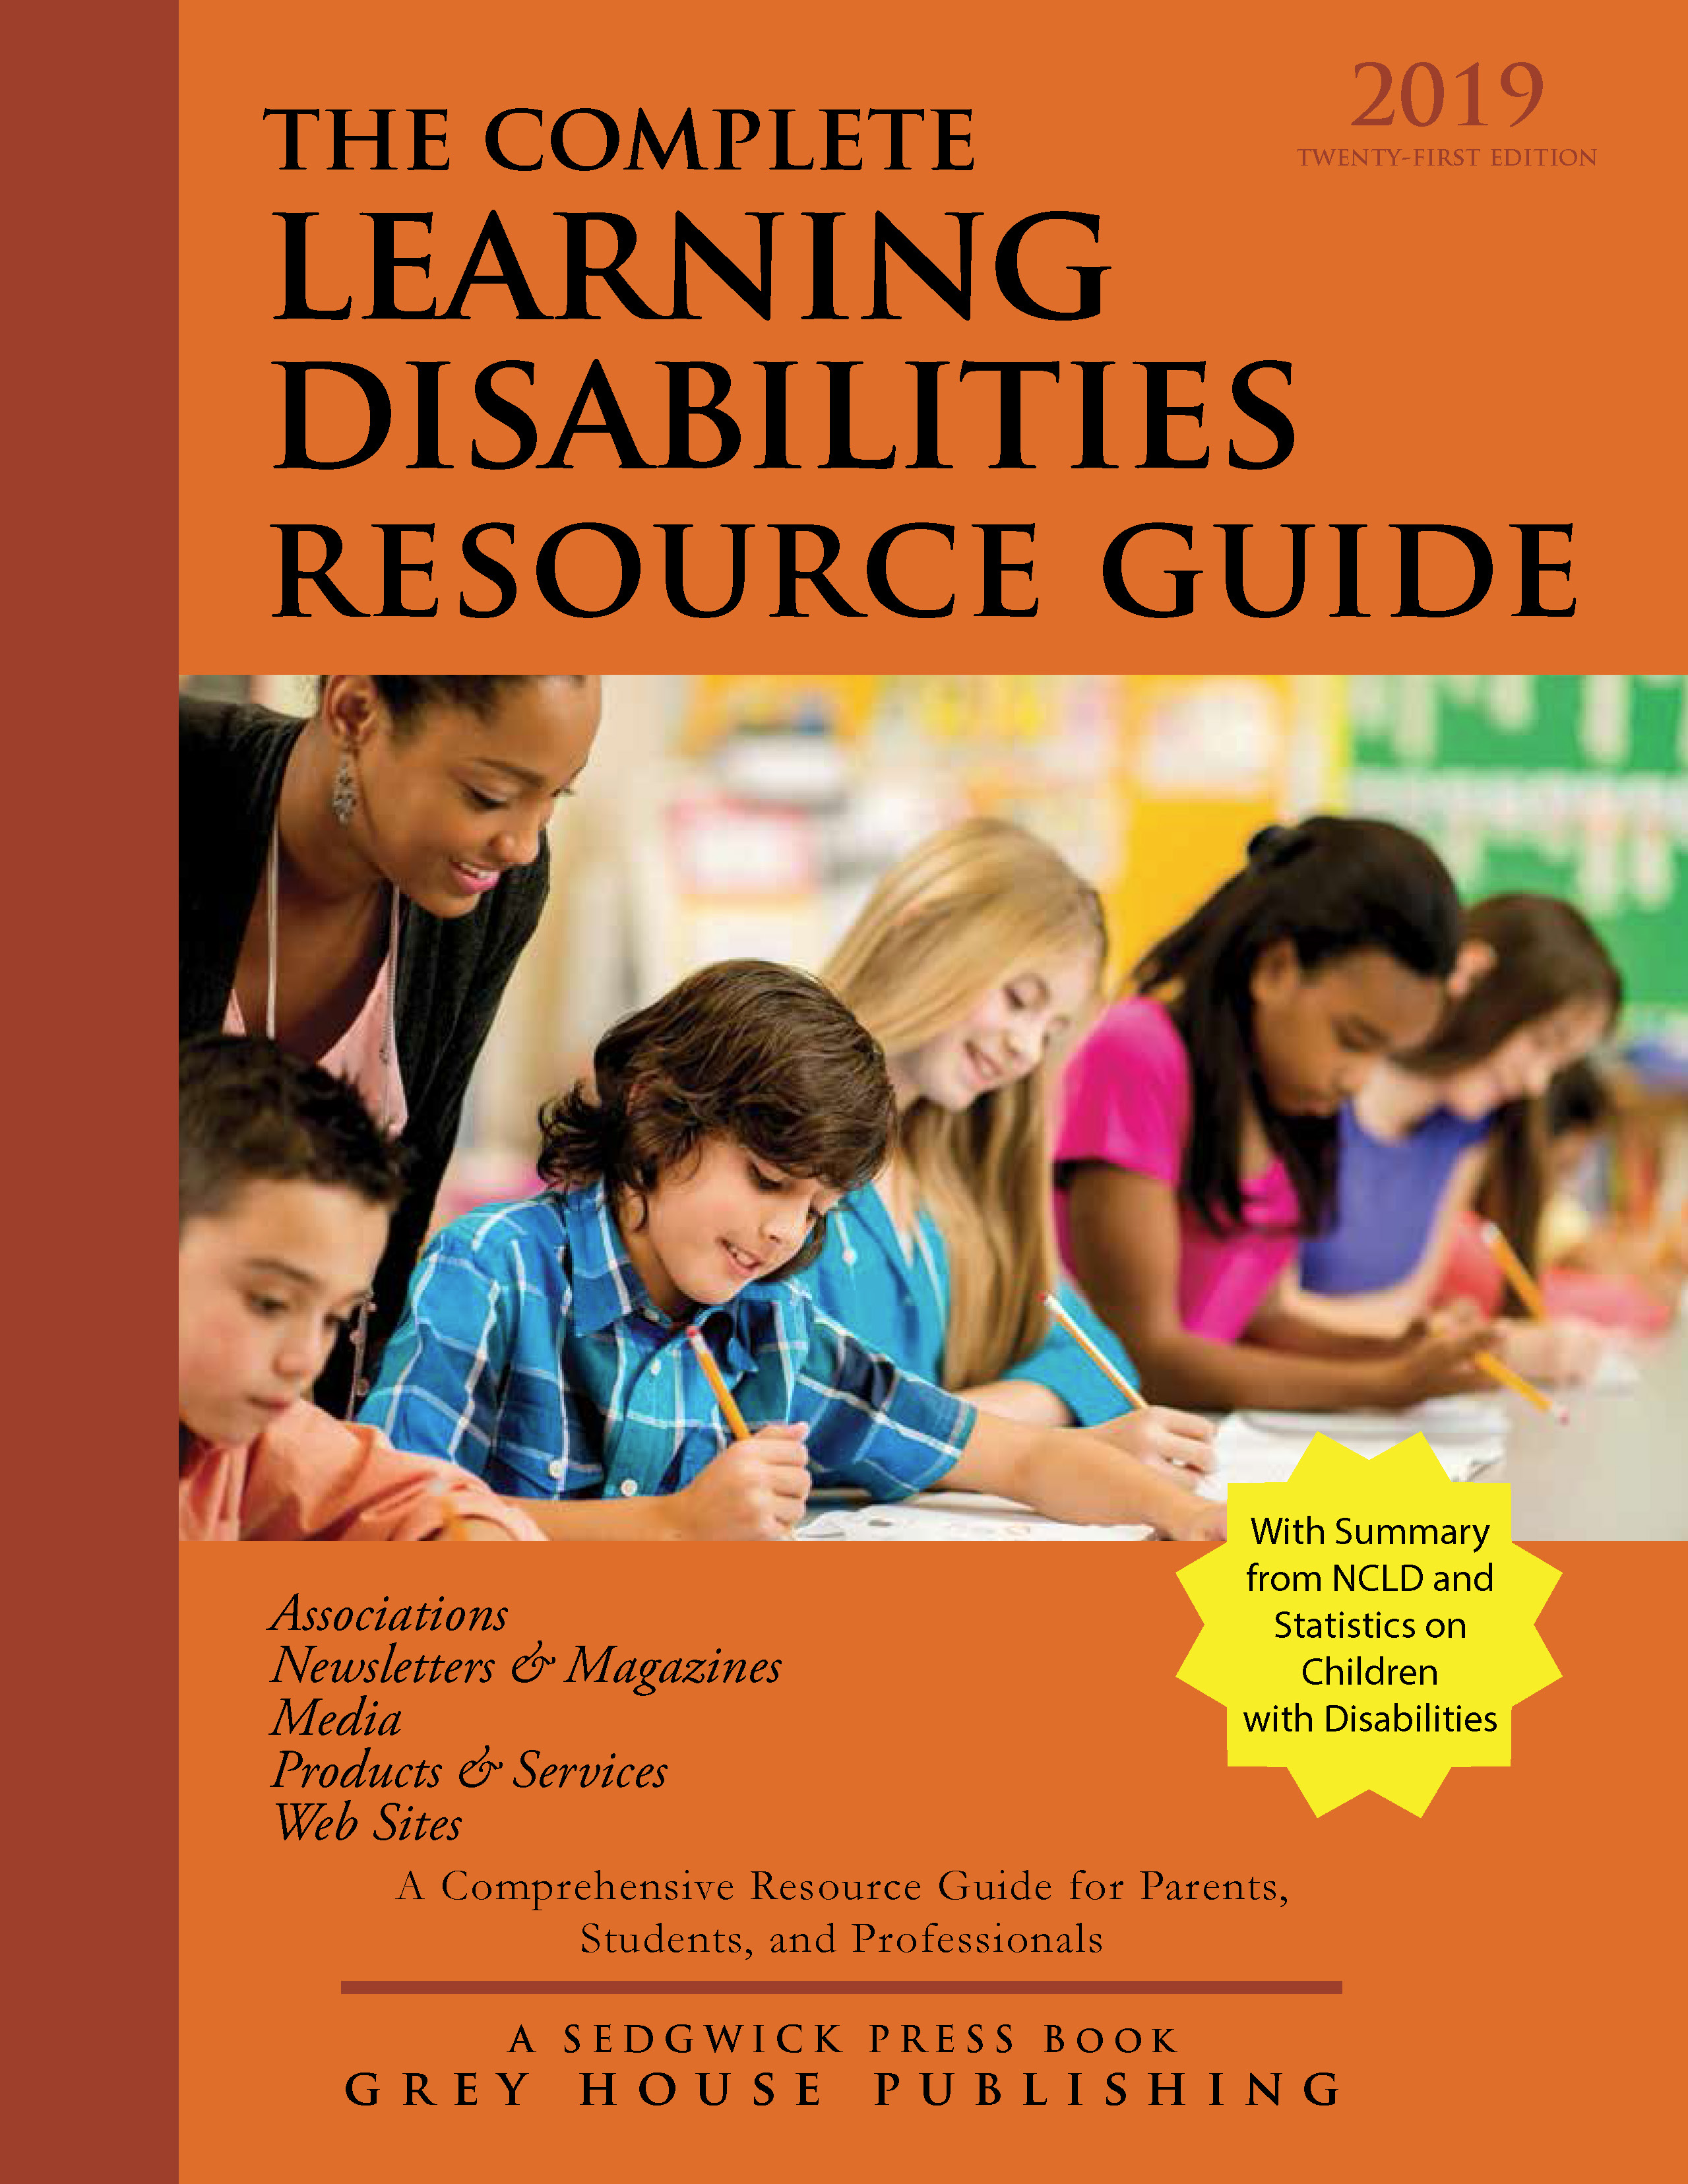 The Complete Learning Disabilities Resource Guide